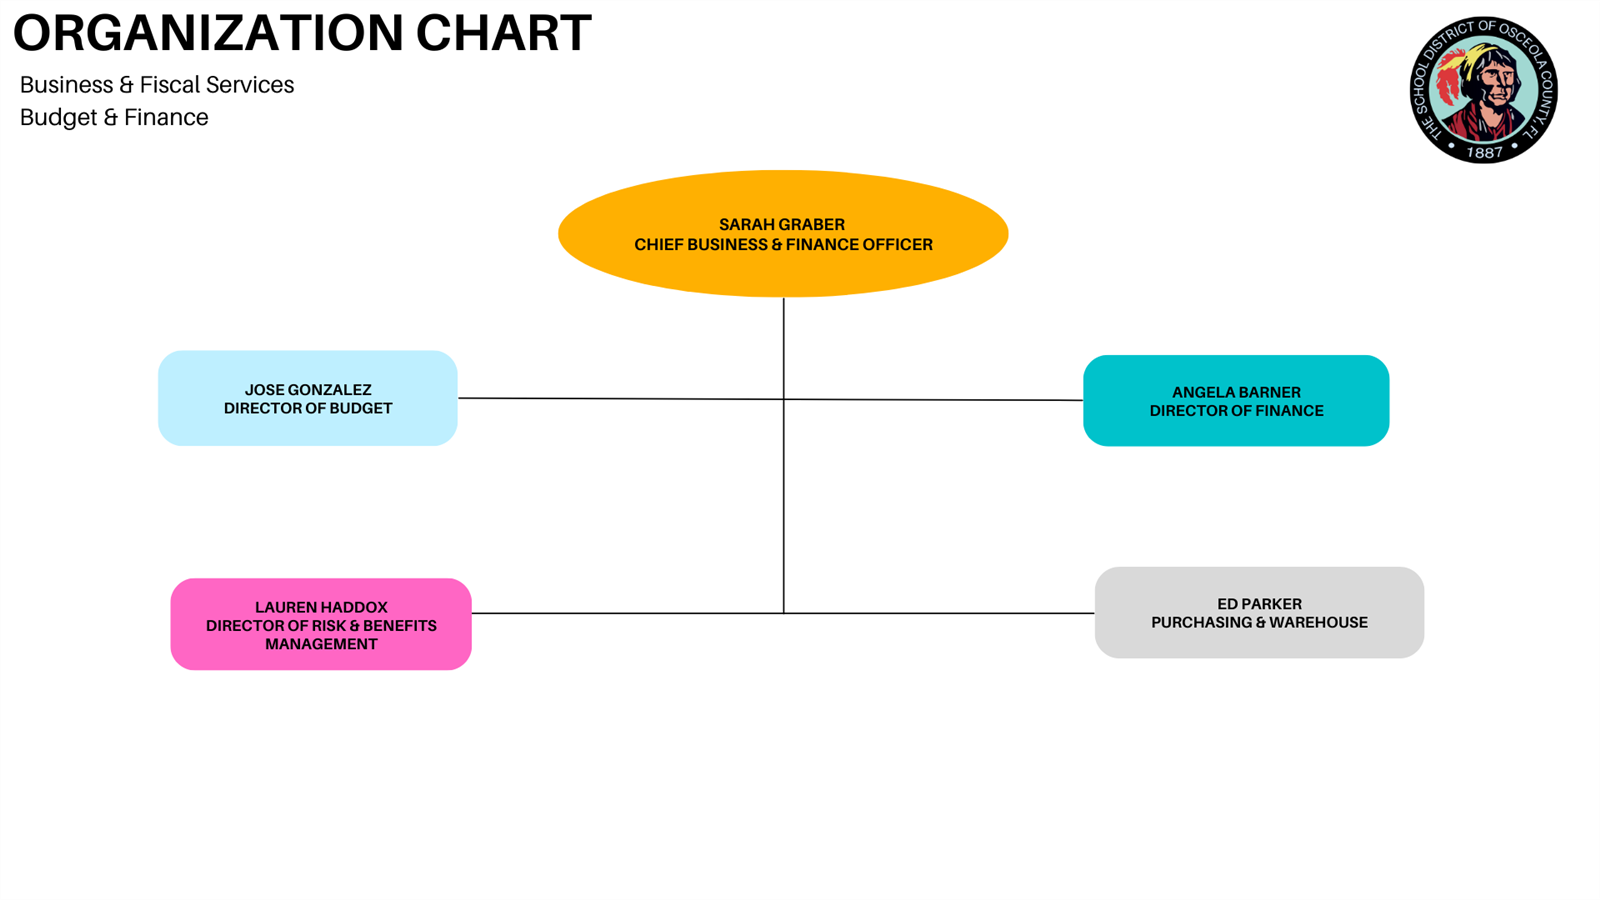 Business and Financial Svs org chart